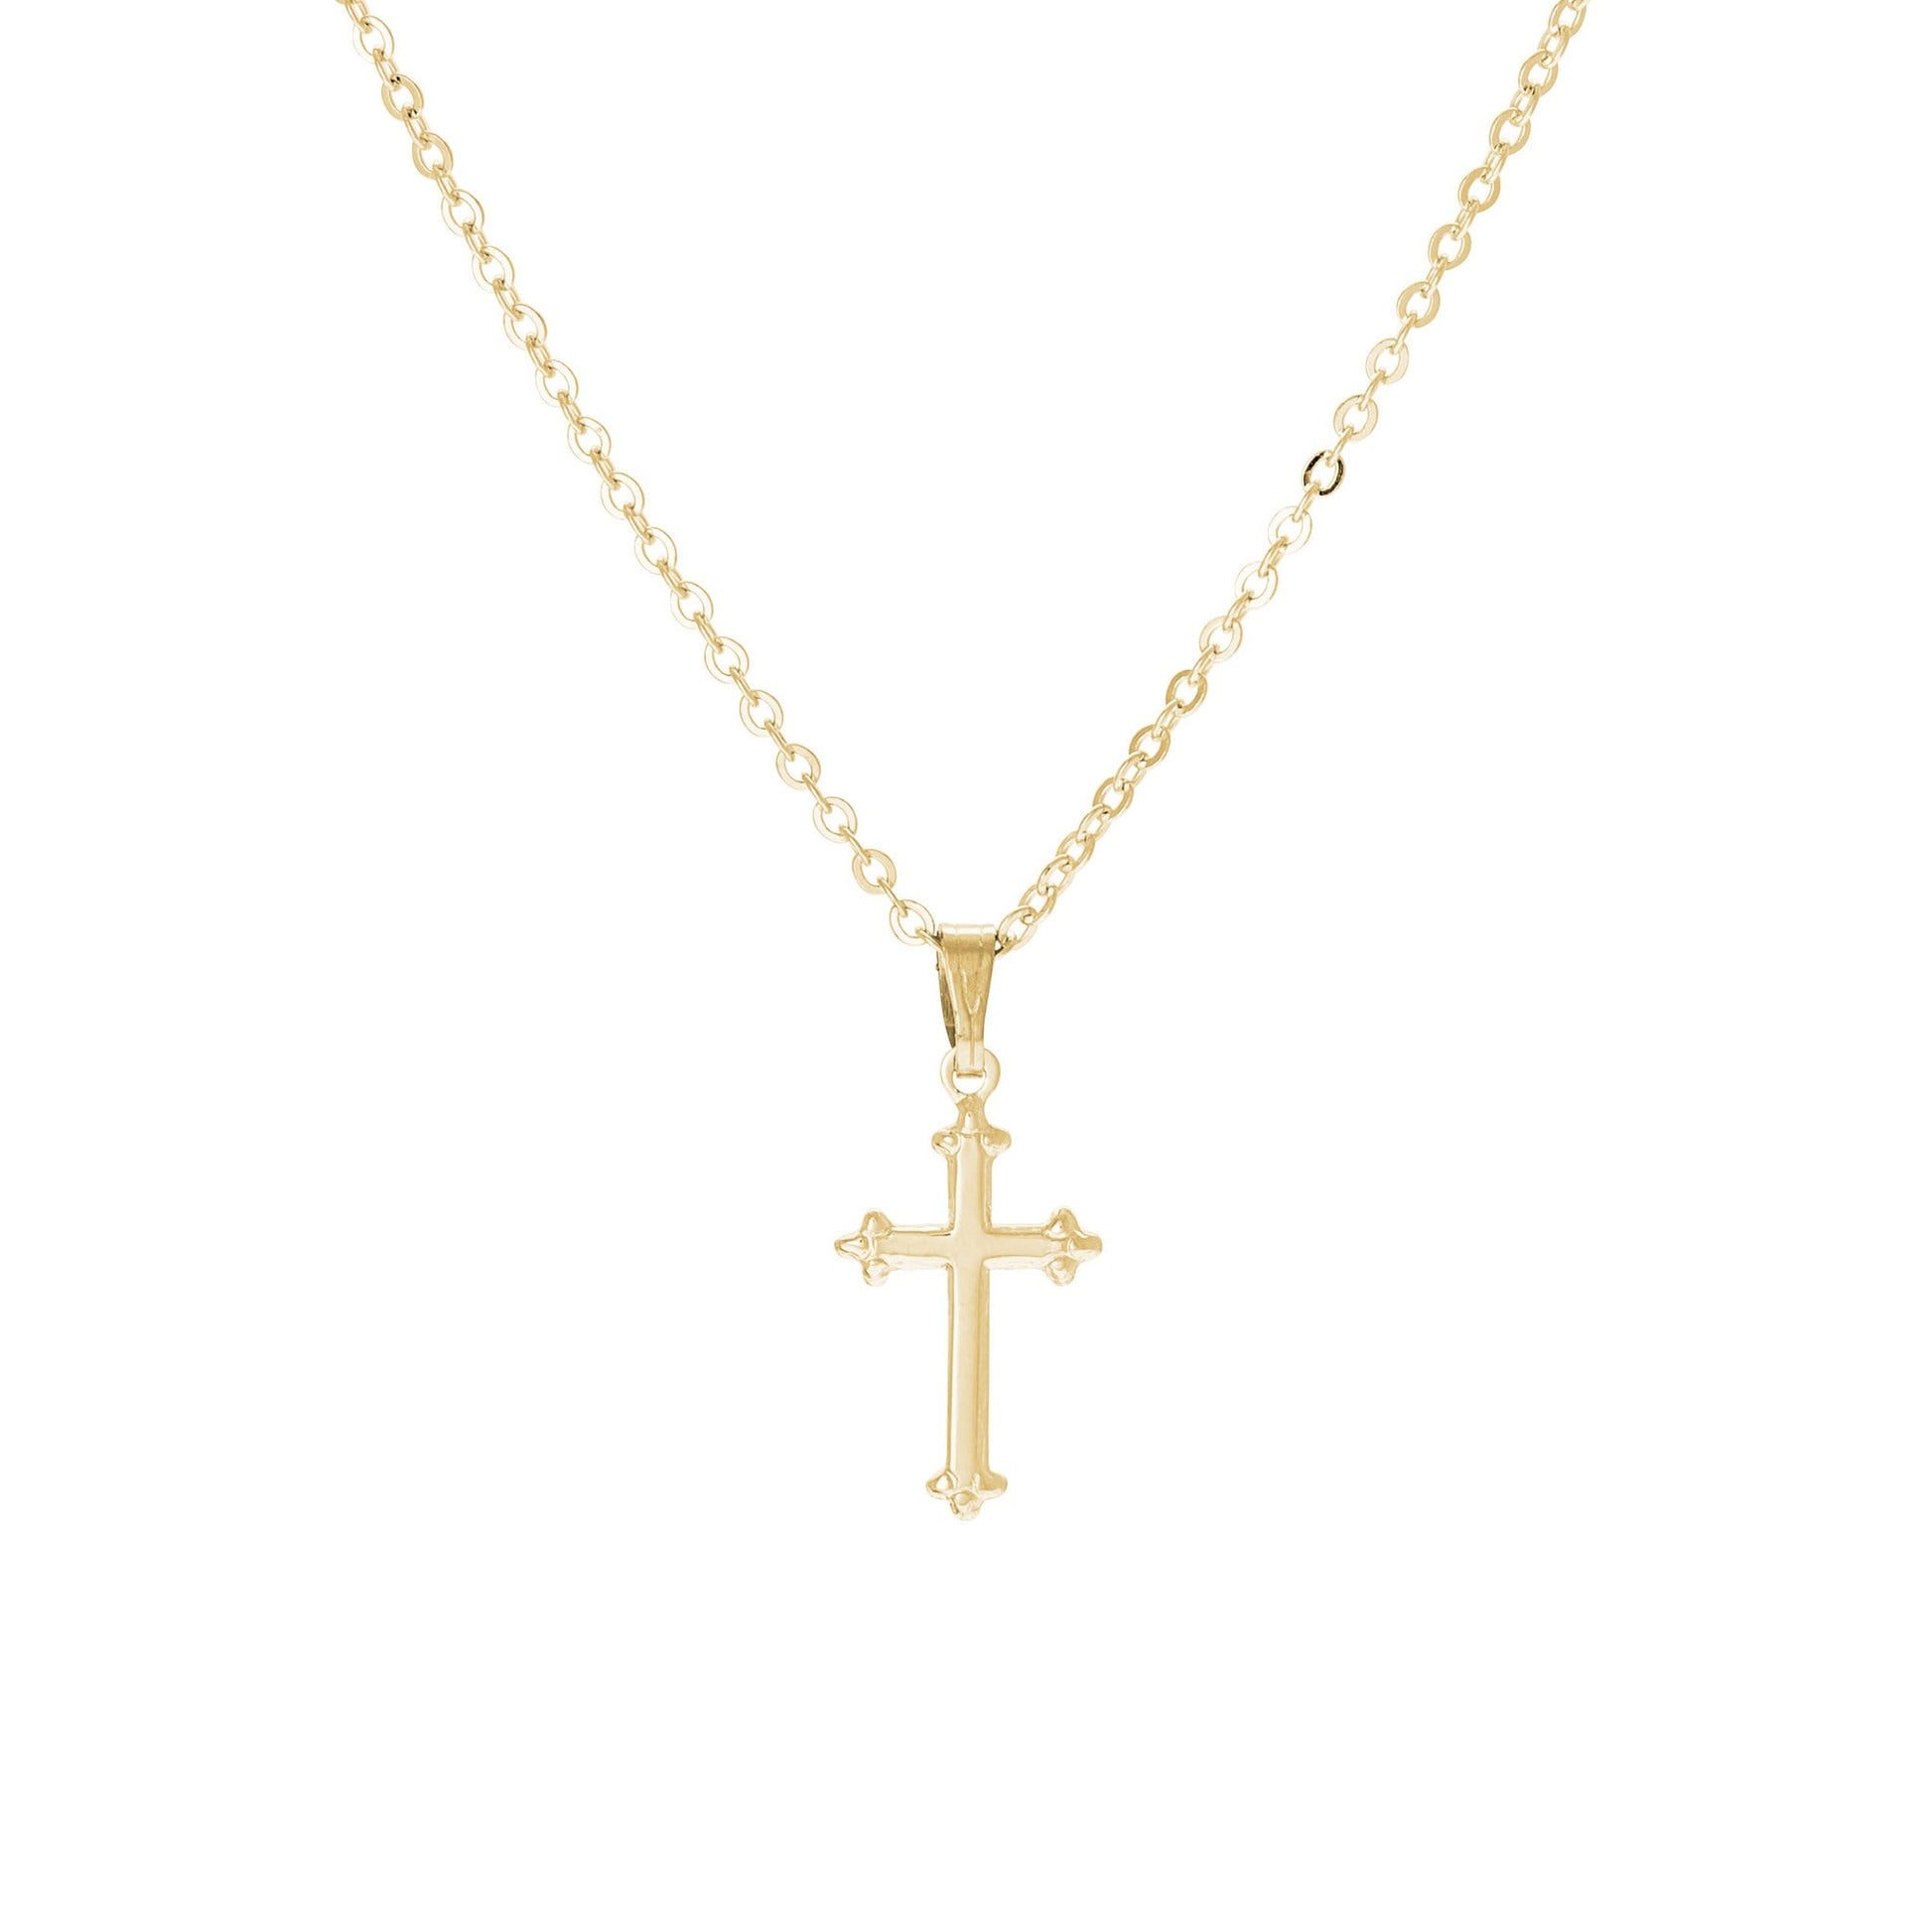 A small plain cross with beaded ends displayed on a neutral white background.